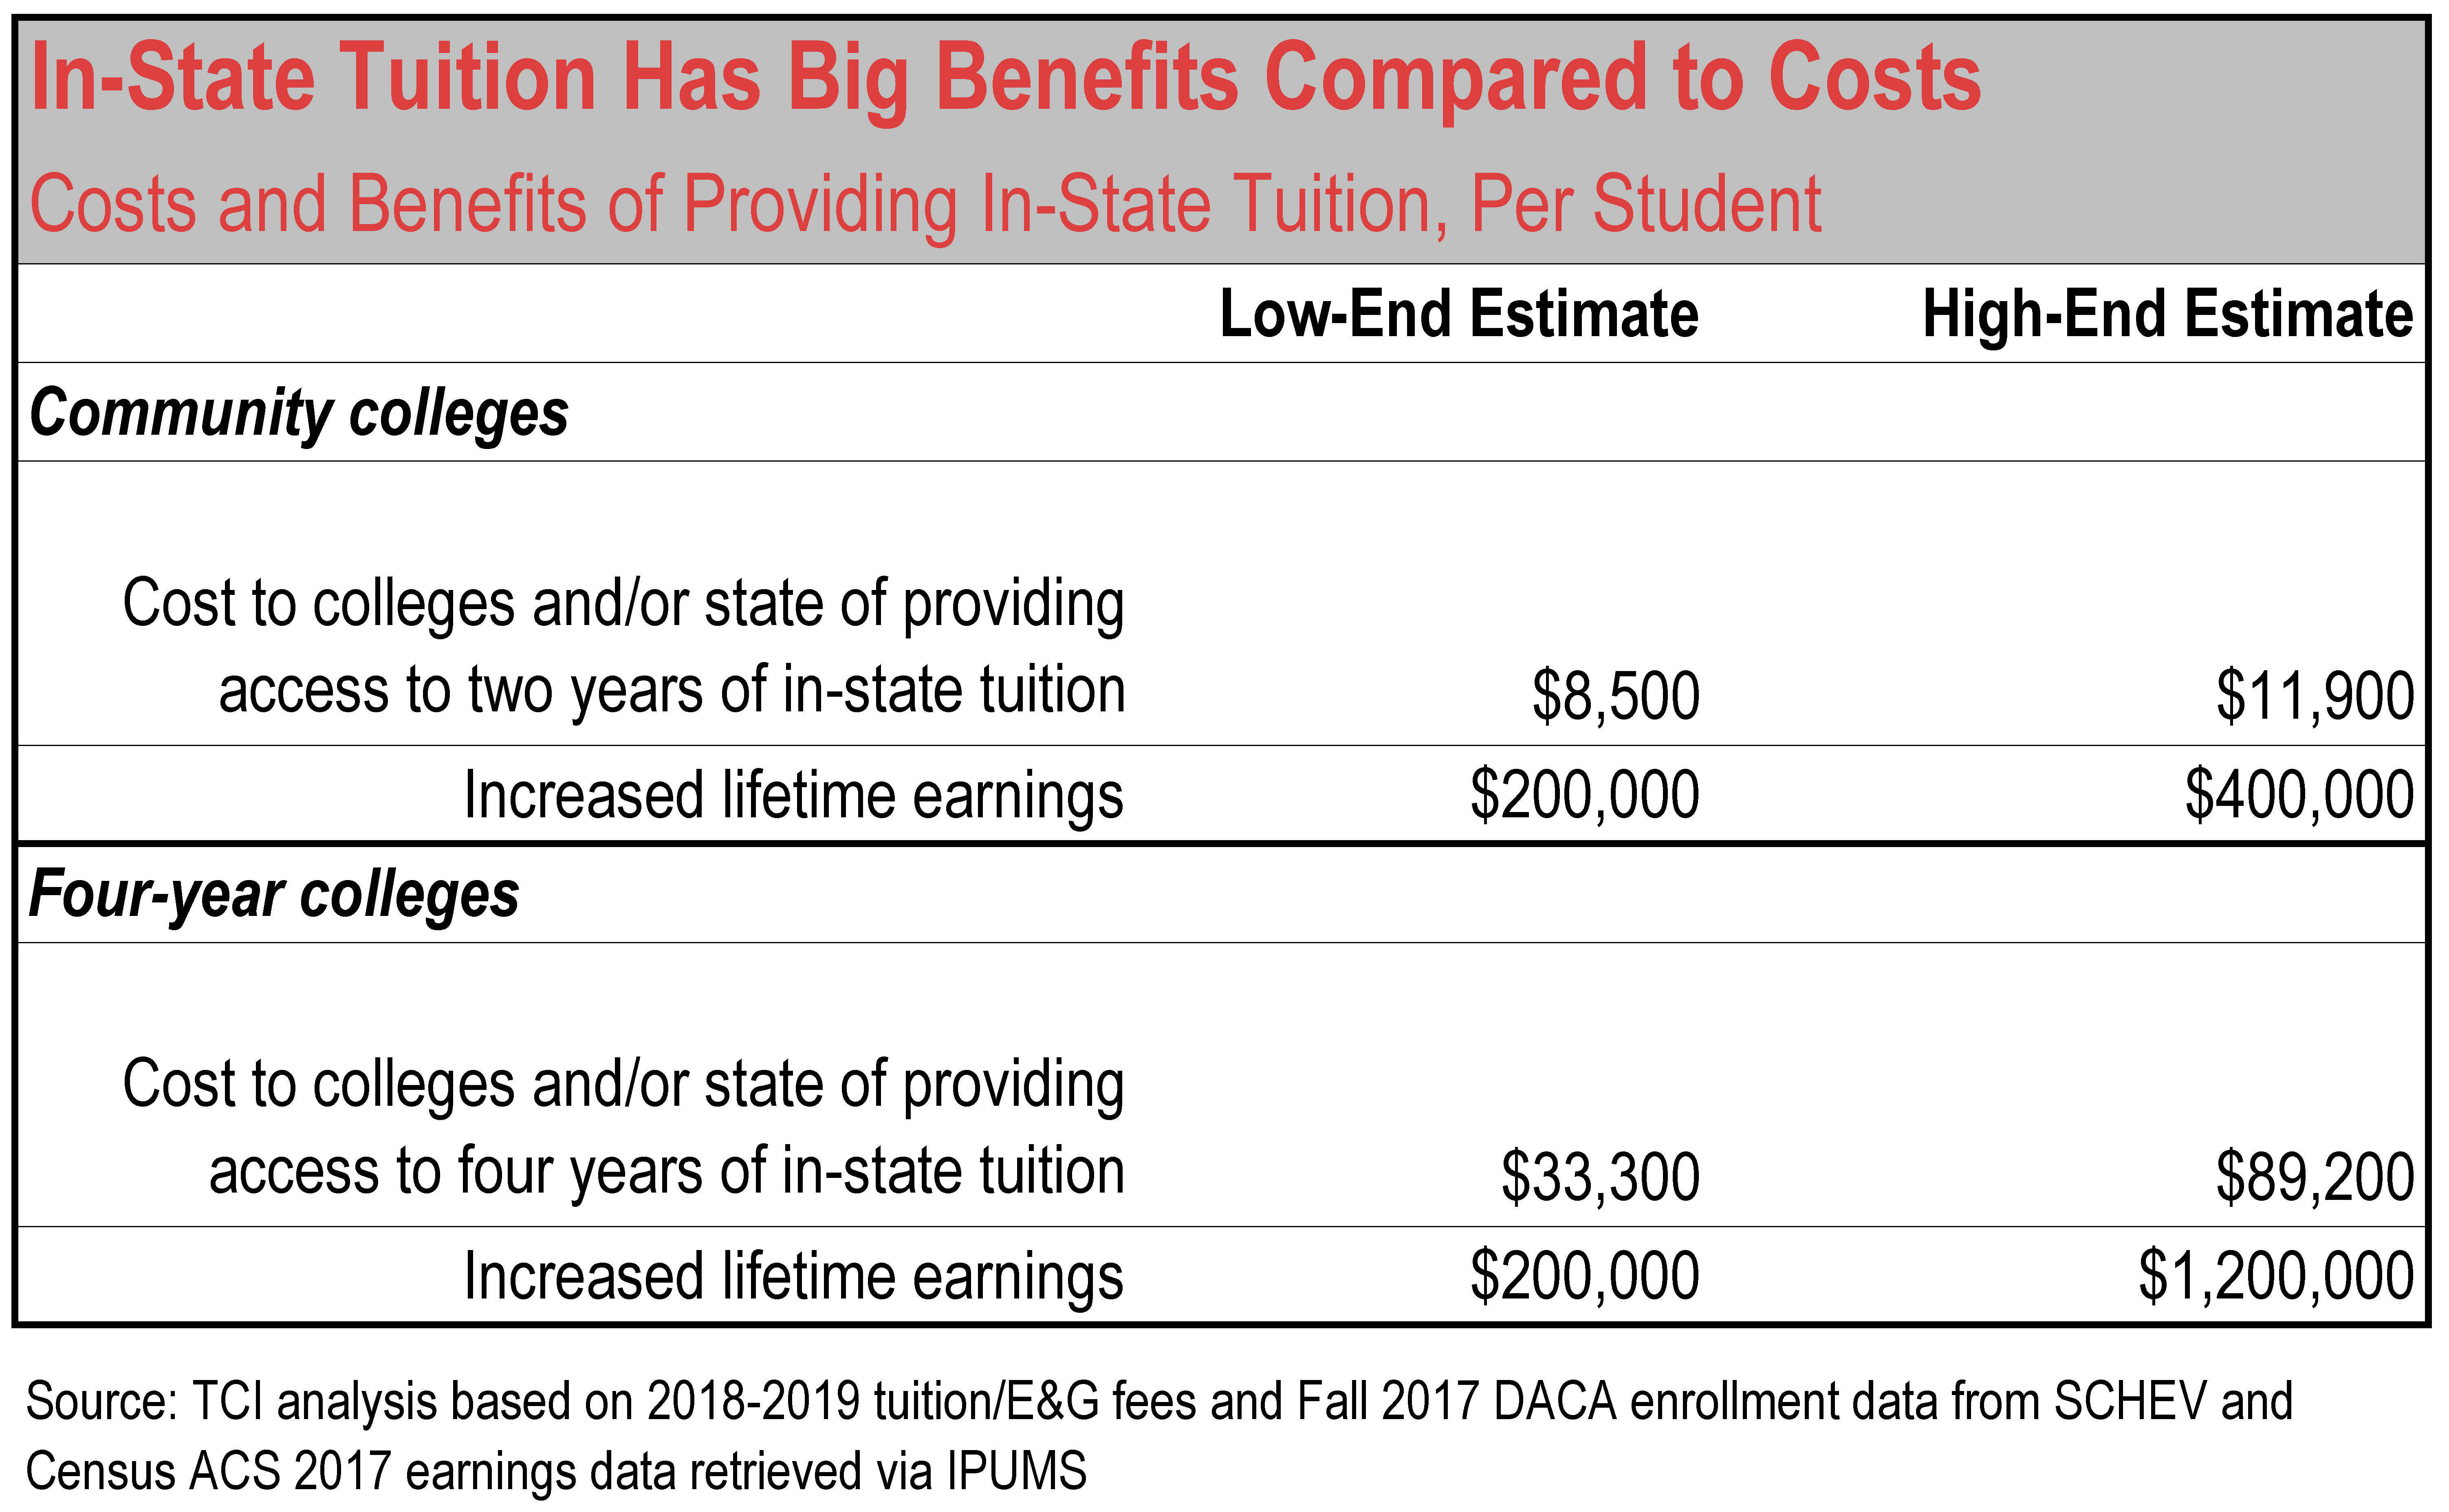 Table showing the costs and benefits of providing in-state-tuition, per student.  For example, the low-end estimate for cost to college and/or state of providing access to four years of in-state tuition is $33,300 while the increased lifetime earnings is $200,000. Based on TCI analysis of 2018-2019 tuition/E&G fees and fall 2017 DACA enrollment data from SCHEV and Census ACS 2017 earnings data retrieved via IPUMS